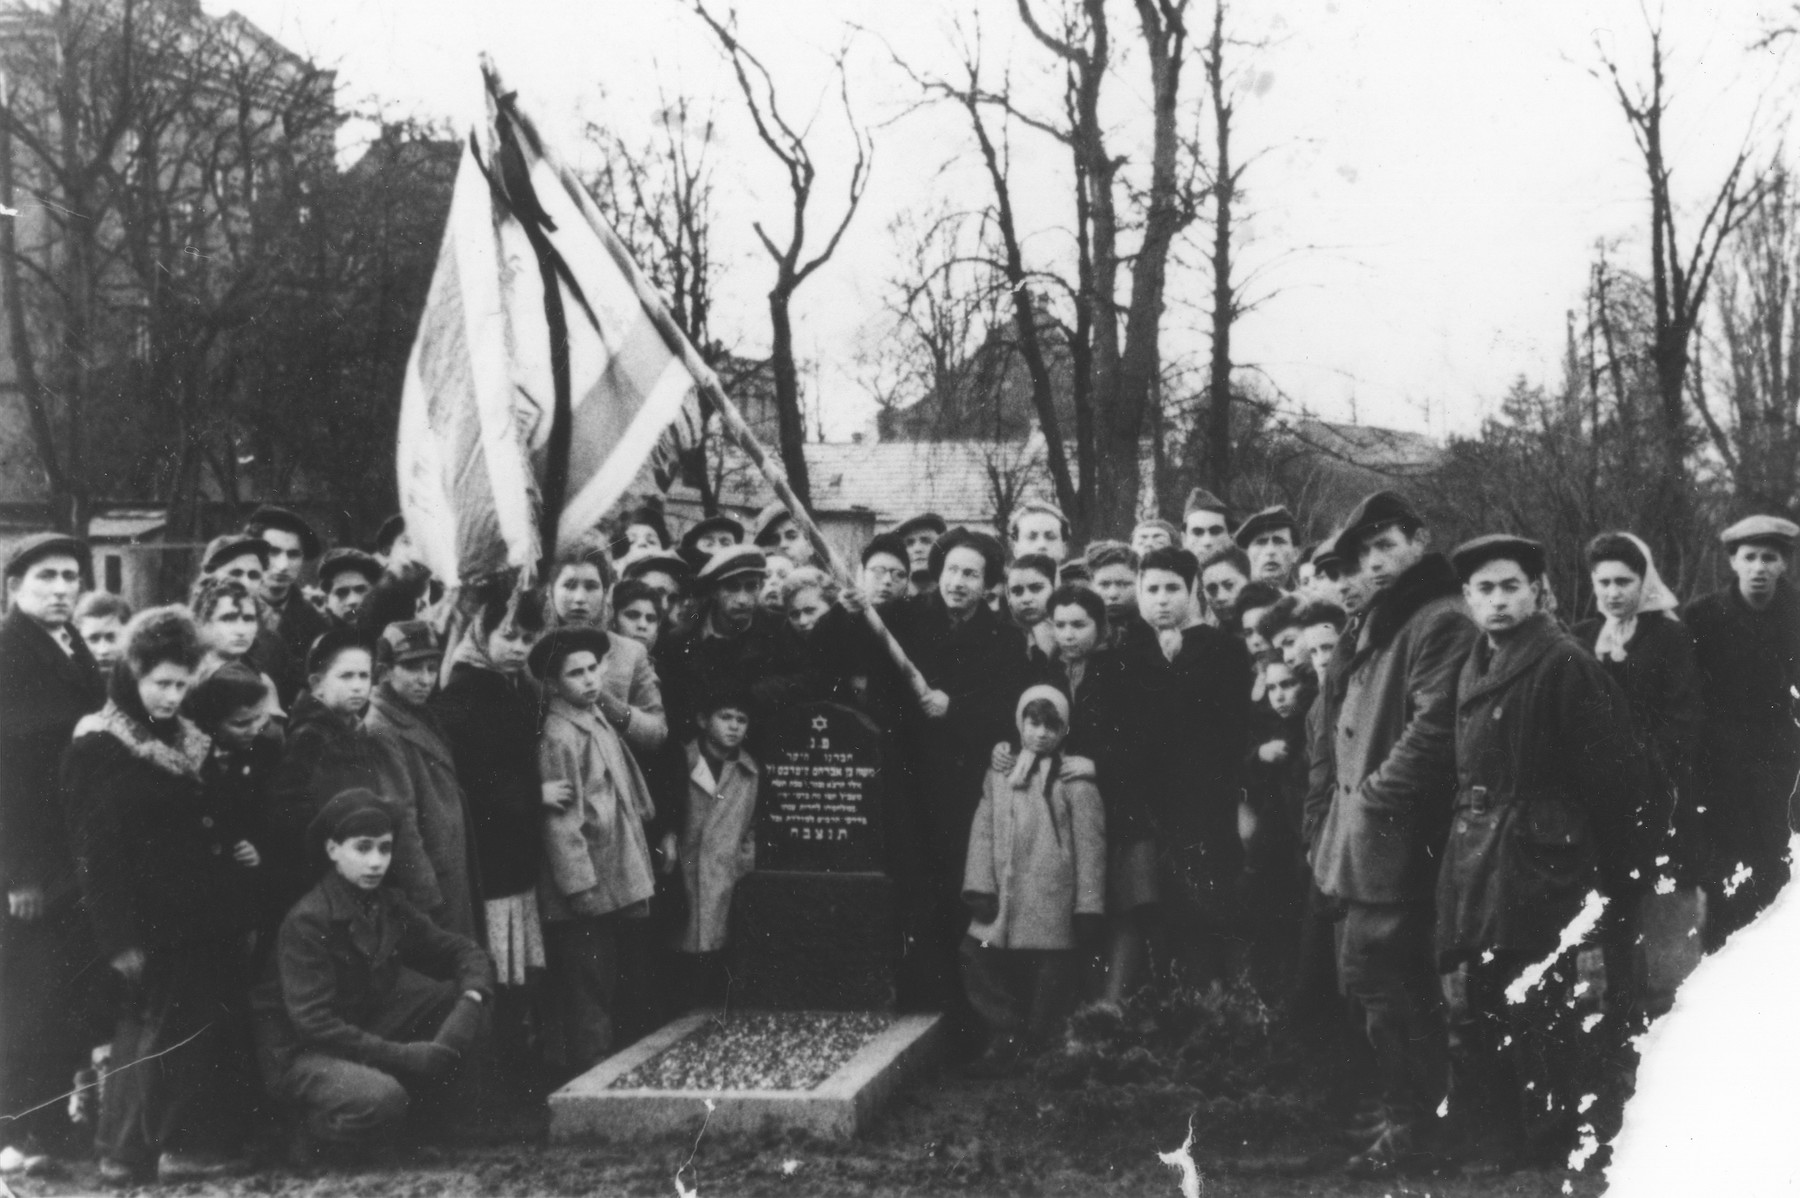 Former passengers on the Exodus 1947 gather around the grave of a comrade who died.  

The grave is that of Moshe Kiperbus, who died December 19, 1947, at the age of 17.